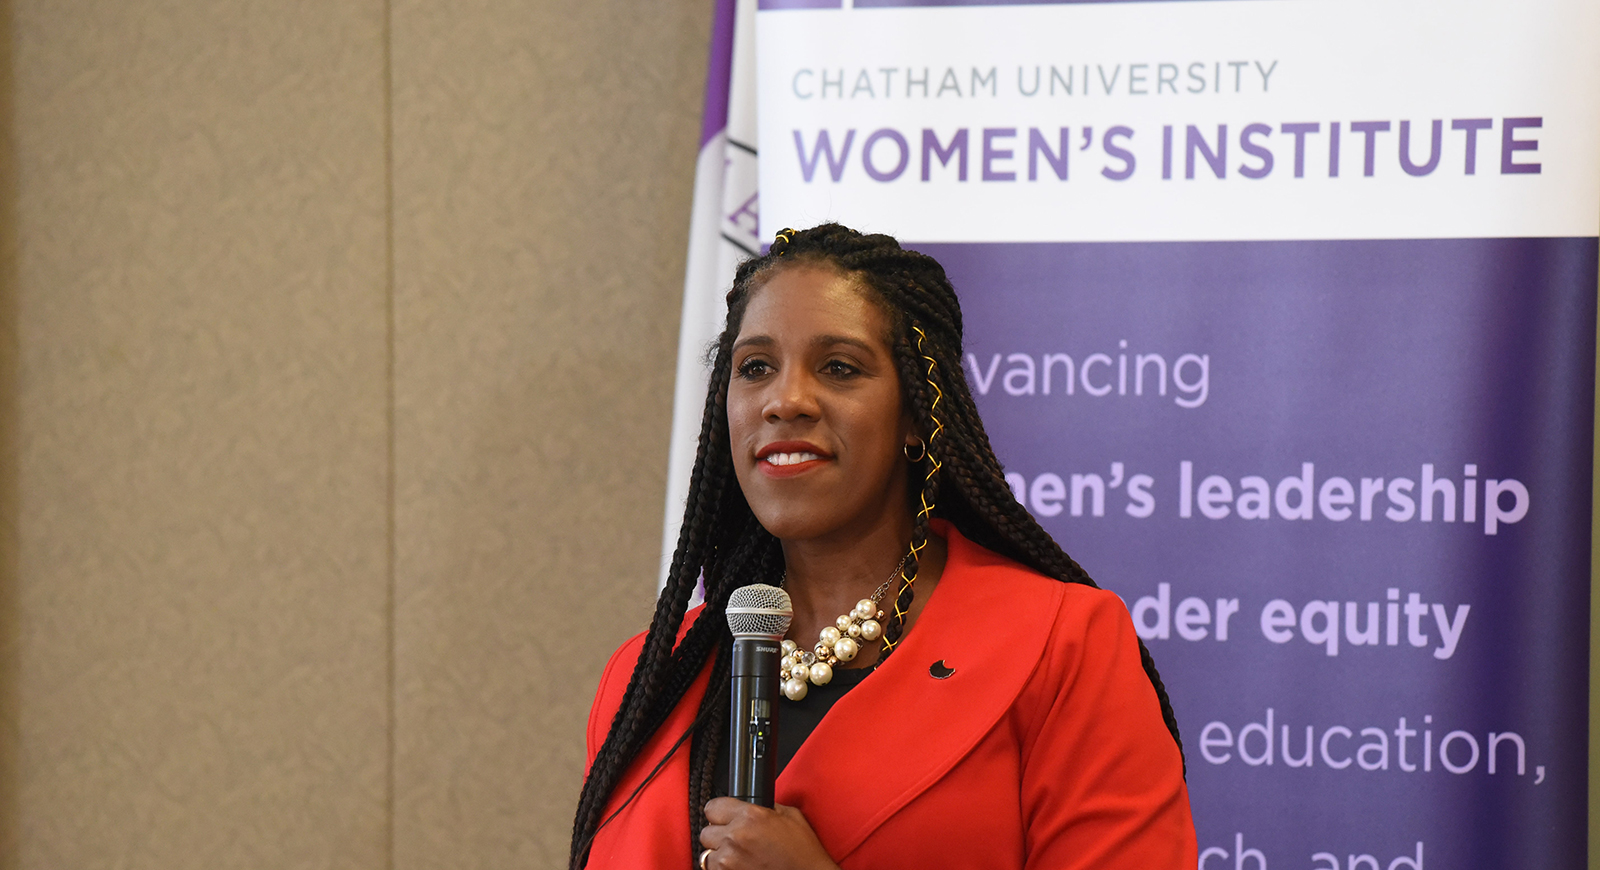 Photo of a woman presenting in front of a banner that reads Chatham University's Women's Institute